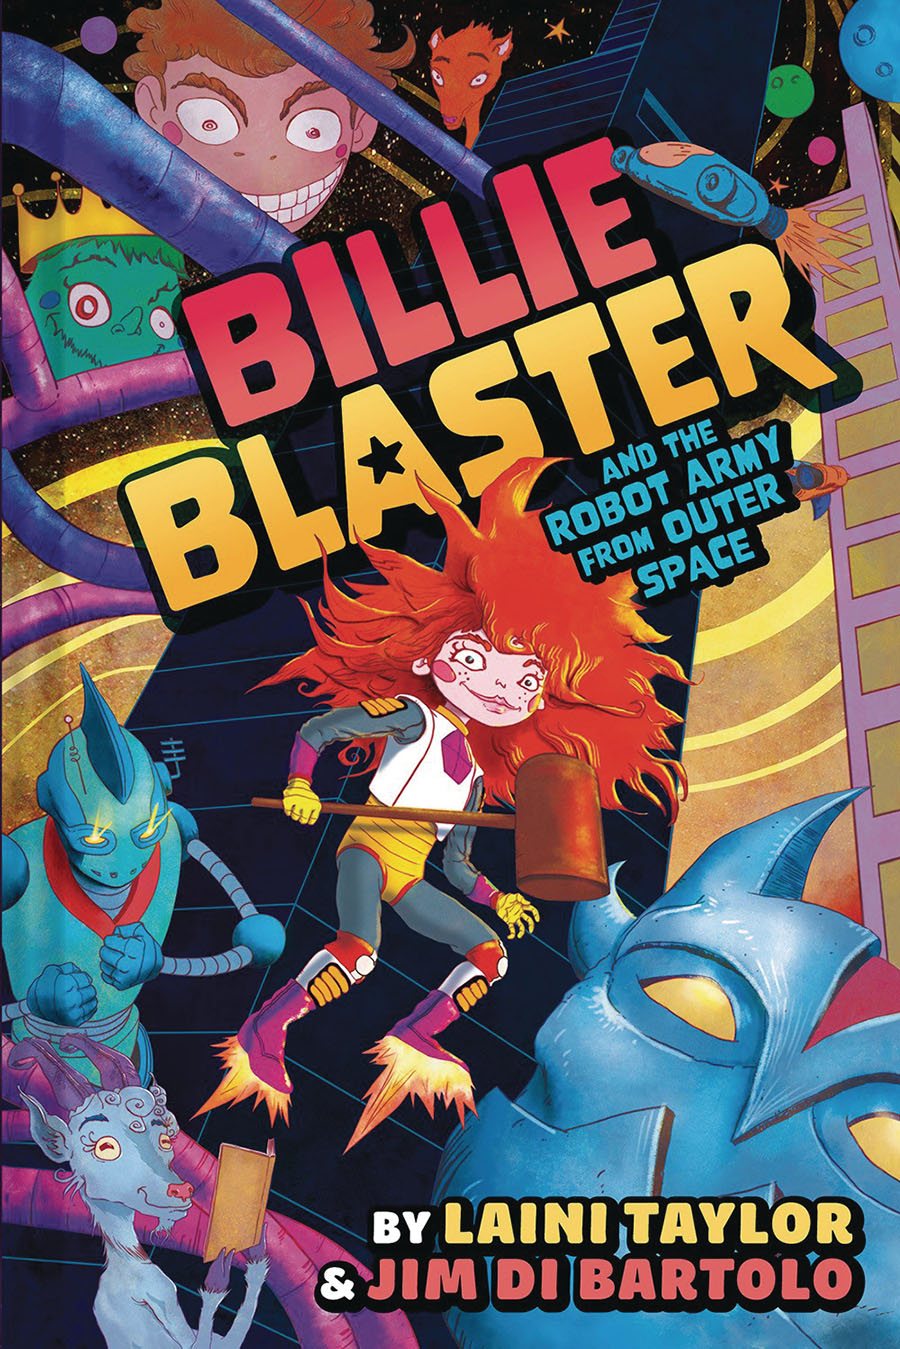 Billie Blaster And The Robot Army From Outer Space HC